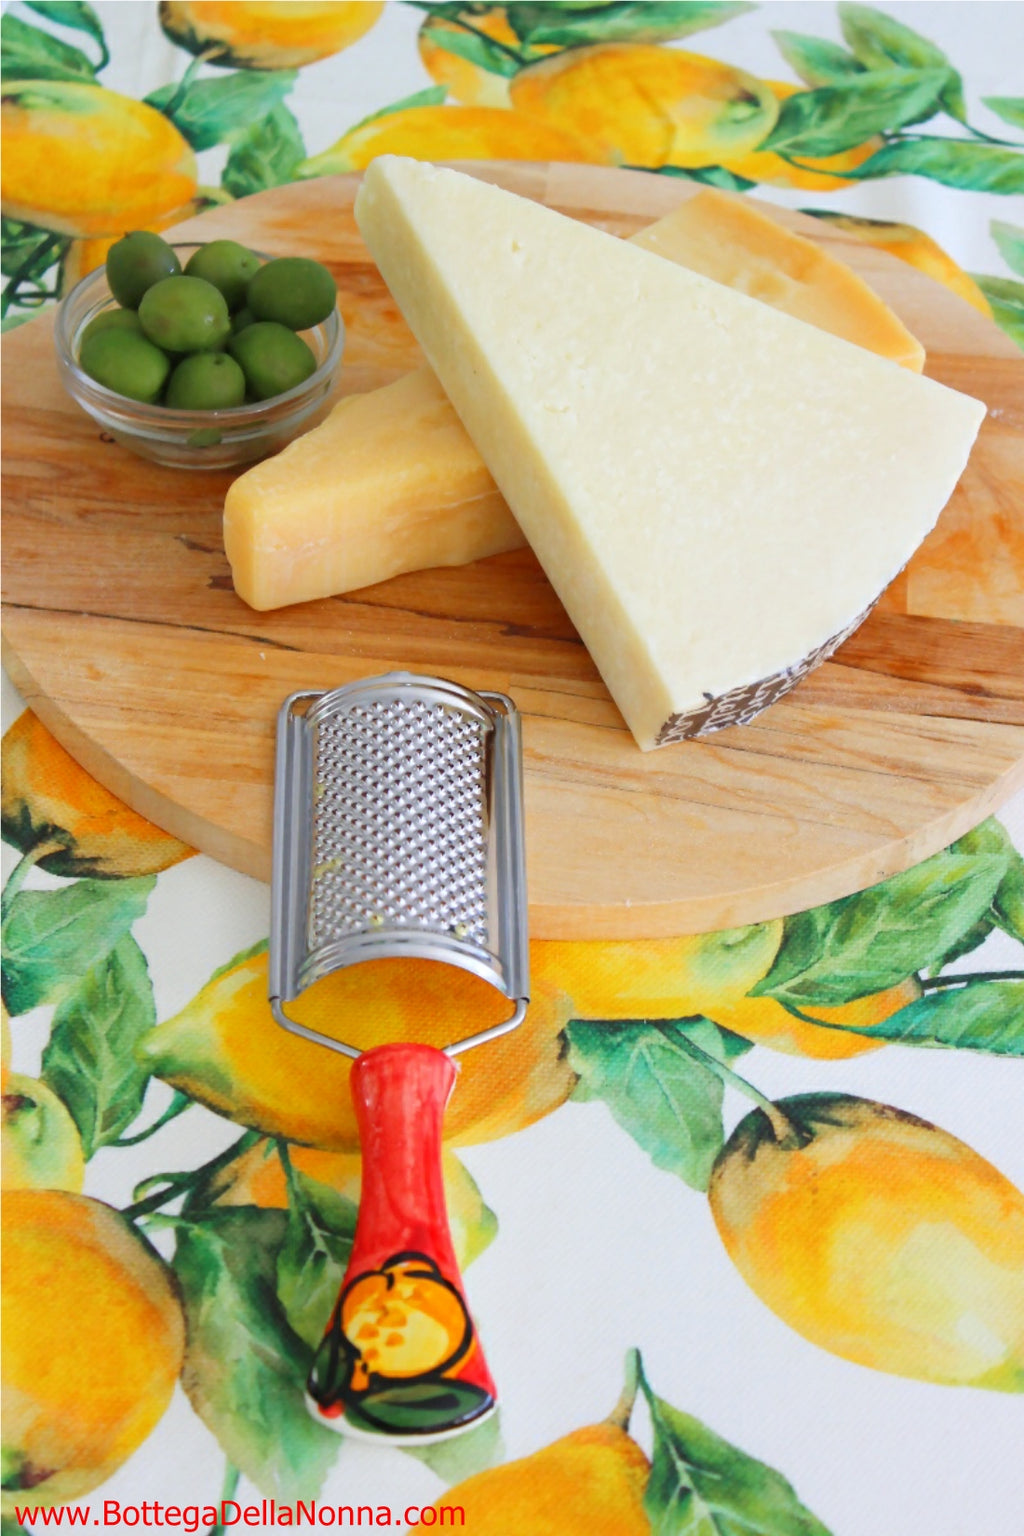 Fante's Rotary Cheese Grater, 18/8 Stainless Steel, The Italian Market  Original since 1906 